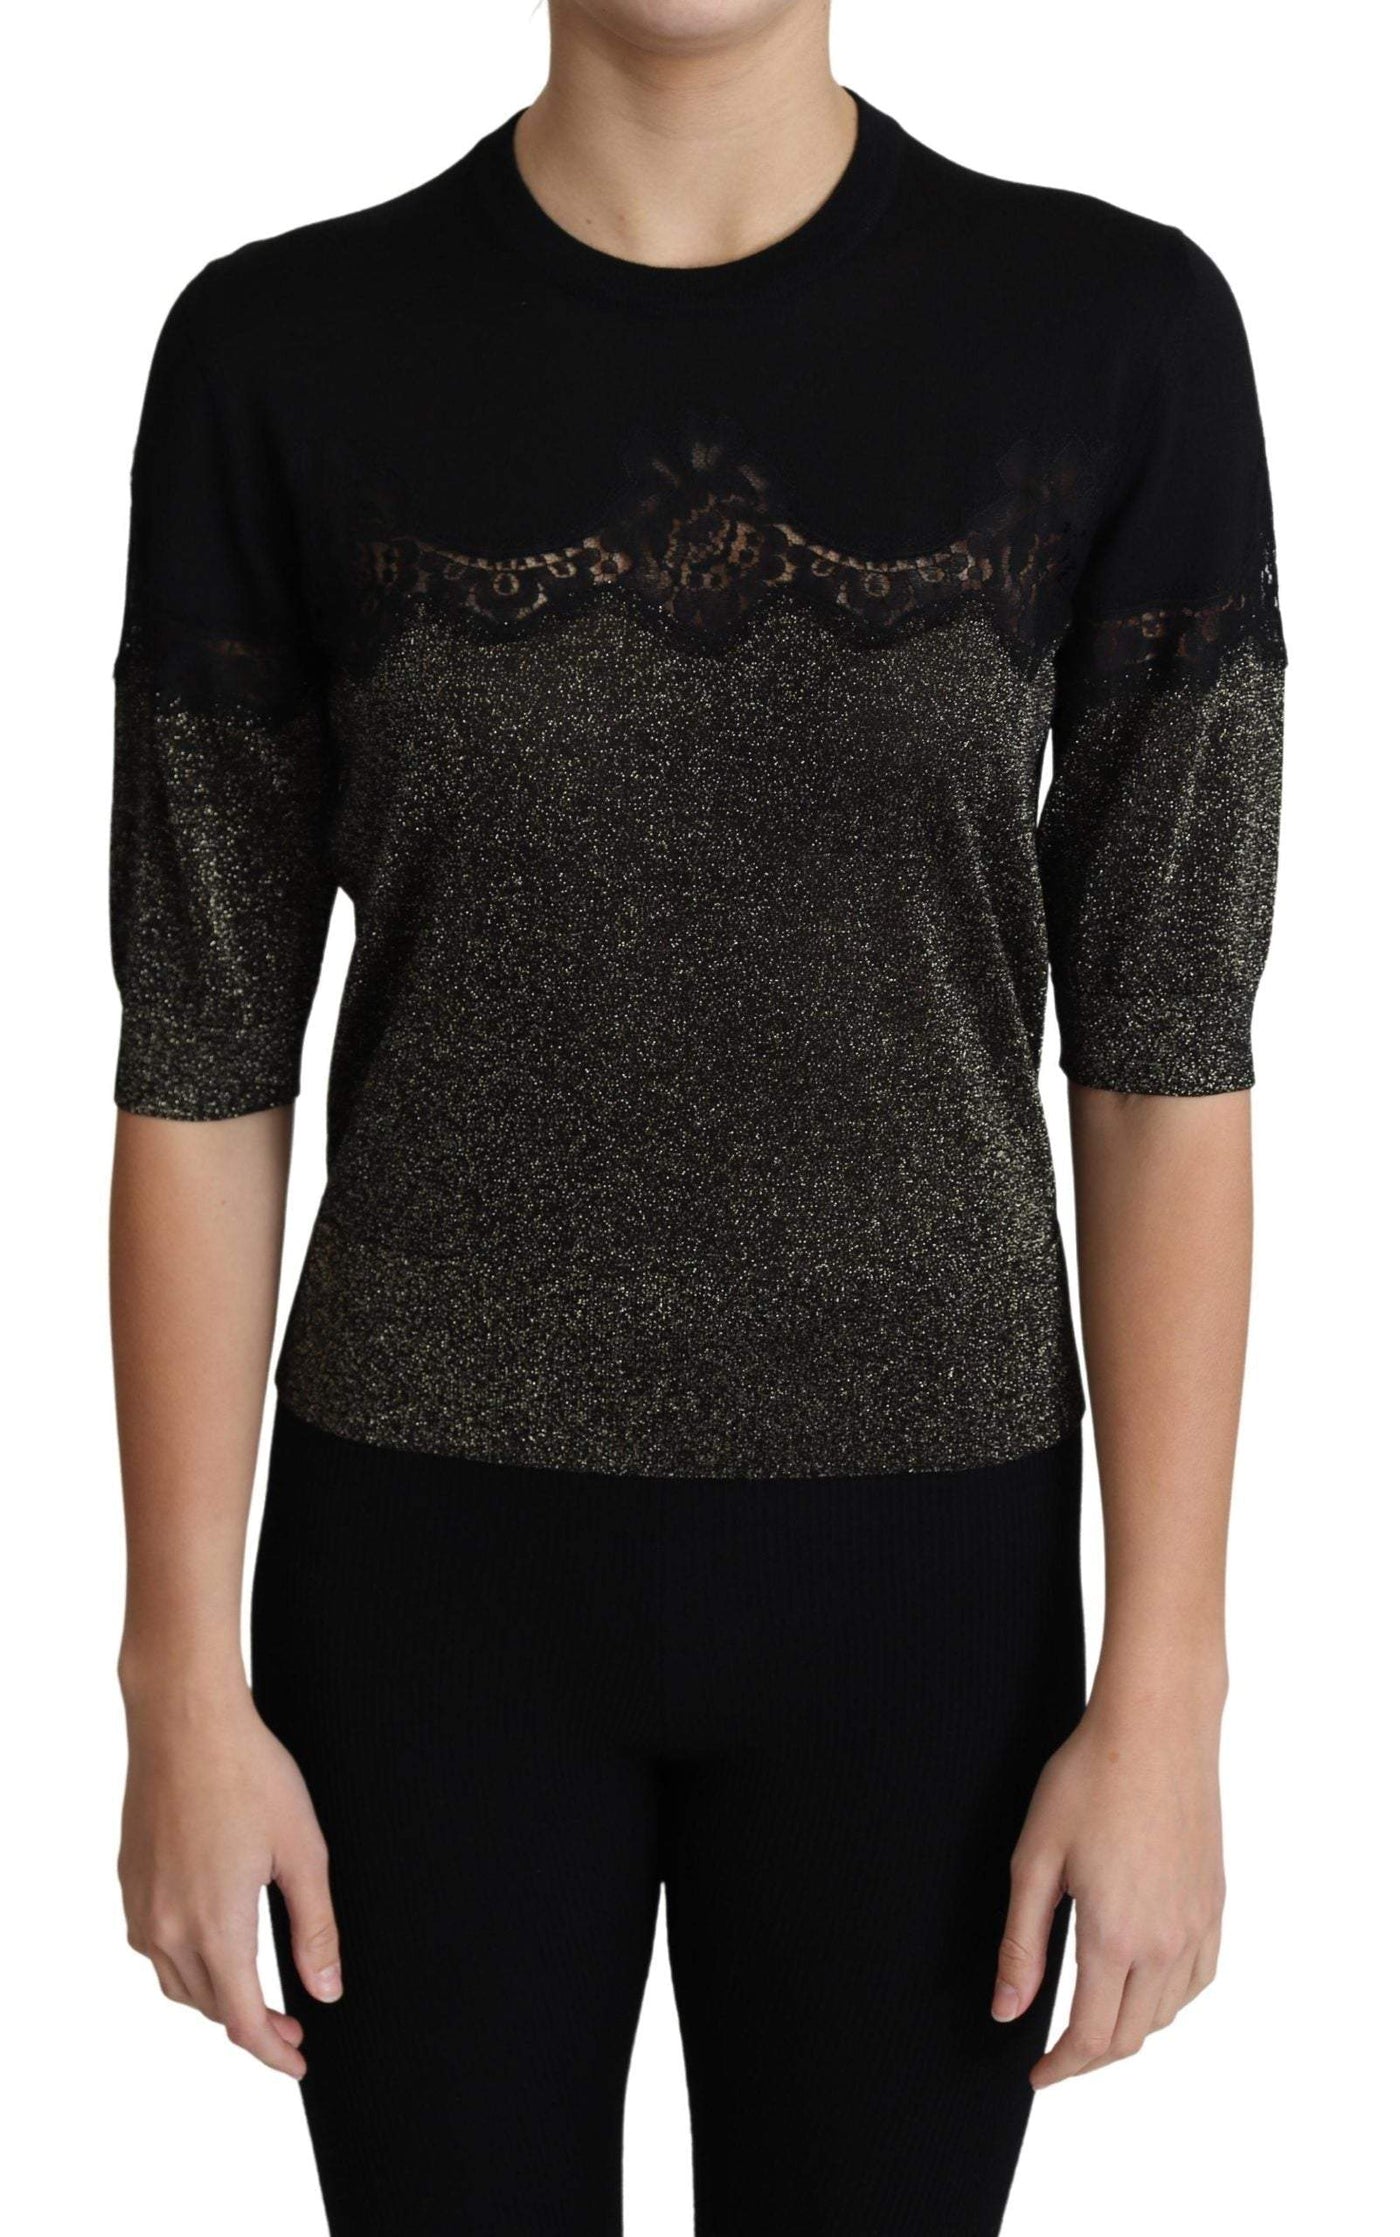 Dolce & Gabbana Black Shiny Lurex Lace Insert Pullover Top #women, Black, Dolce & Gabbana, feed-agegroup-adult, feed-color-Black, feed-gender-female, feed-size-IT36 | XS, feed-size-IT42|M, feed-size-IT44|L, feed-size-IT46|XL, IT36 | XS, IT42|M, IT44|L, IT46|XL, Tops & T-Shirts - Women - Clothing, Women - New Arrivals at SEYMAYKA